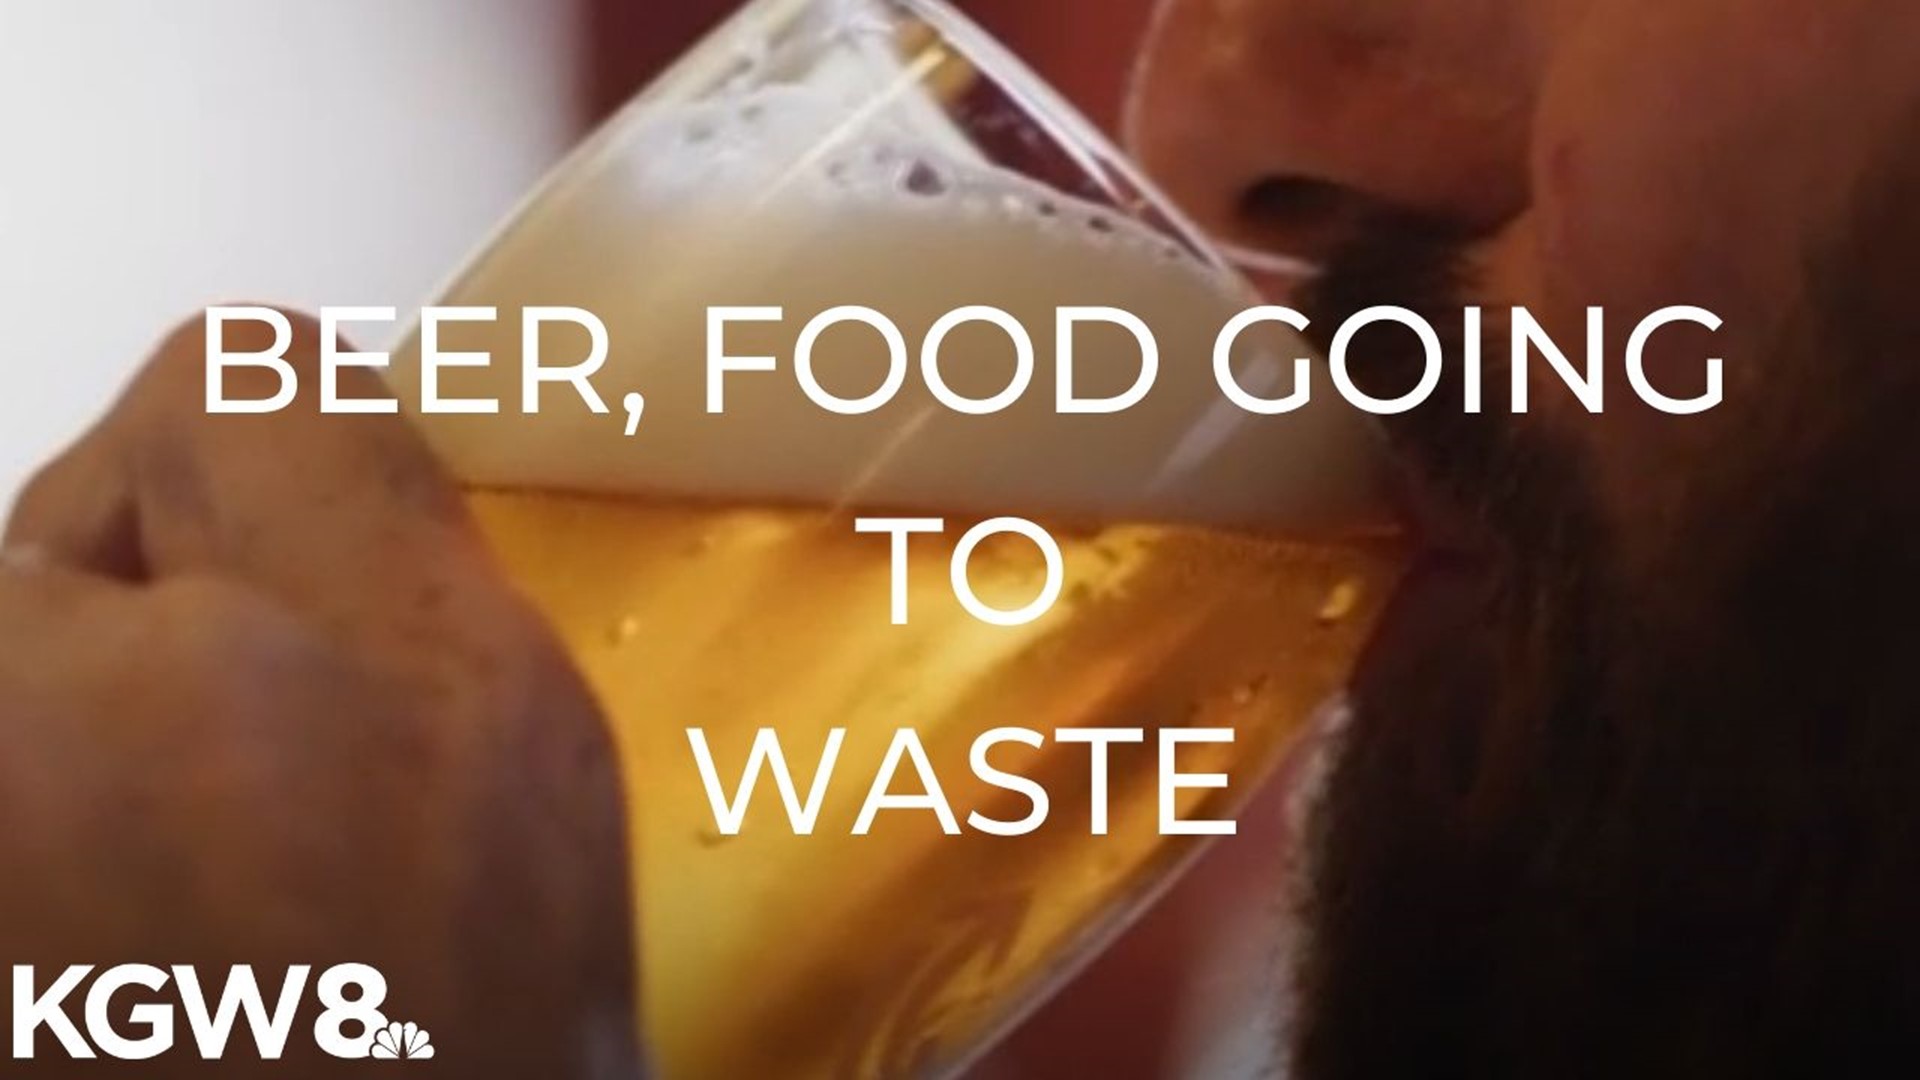 Beer and food are going to waste during the pandemic.